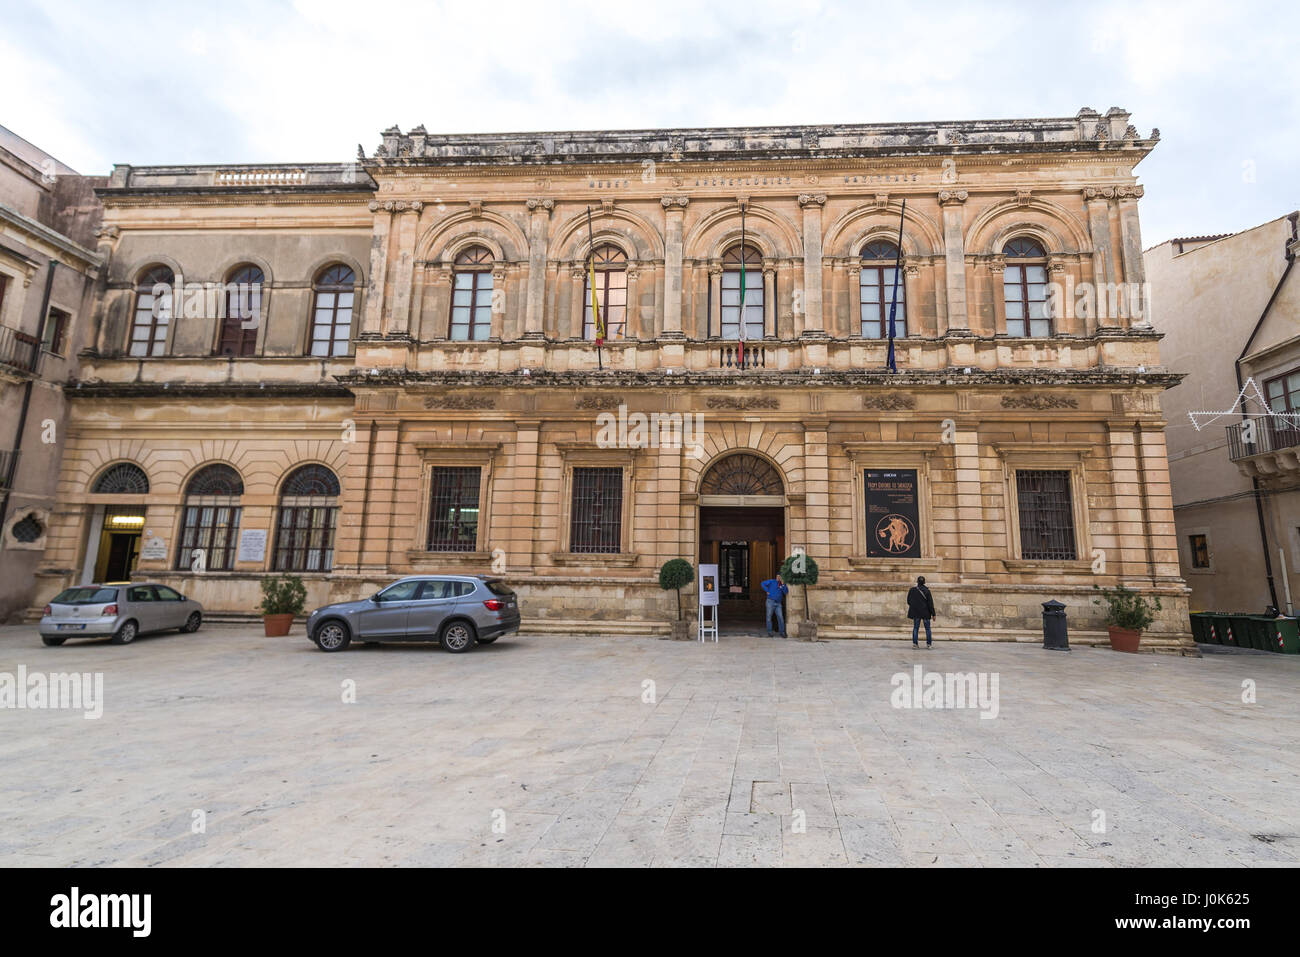 Palace of the Superintendence of Cultural Heritage of the Province of Siracusa at Cathedral Square on Ortygia island, Syracuse, Sicily, Italy Stock Photo